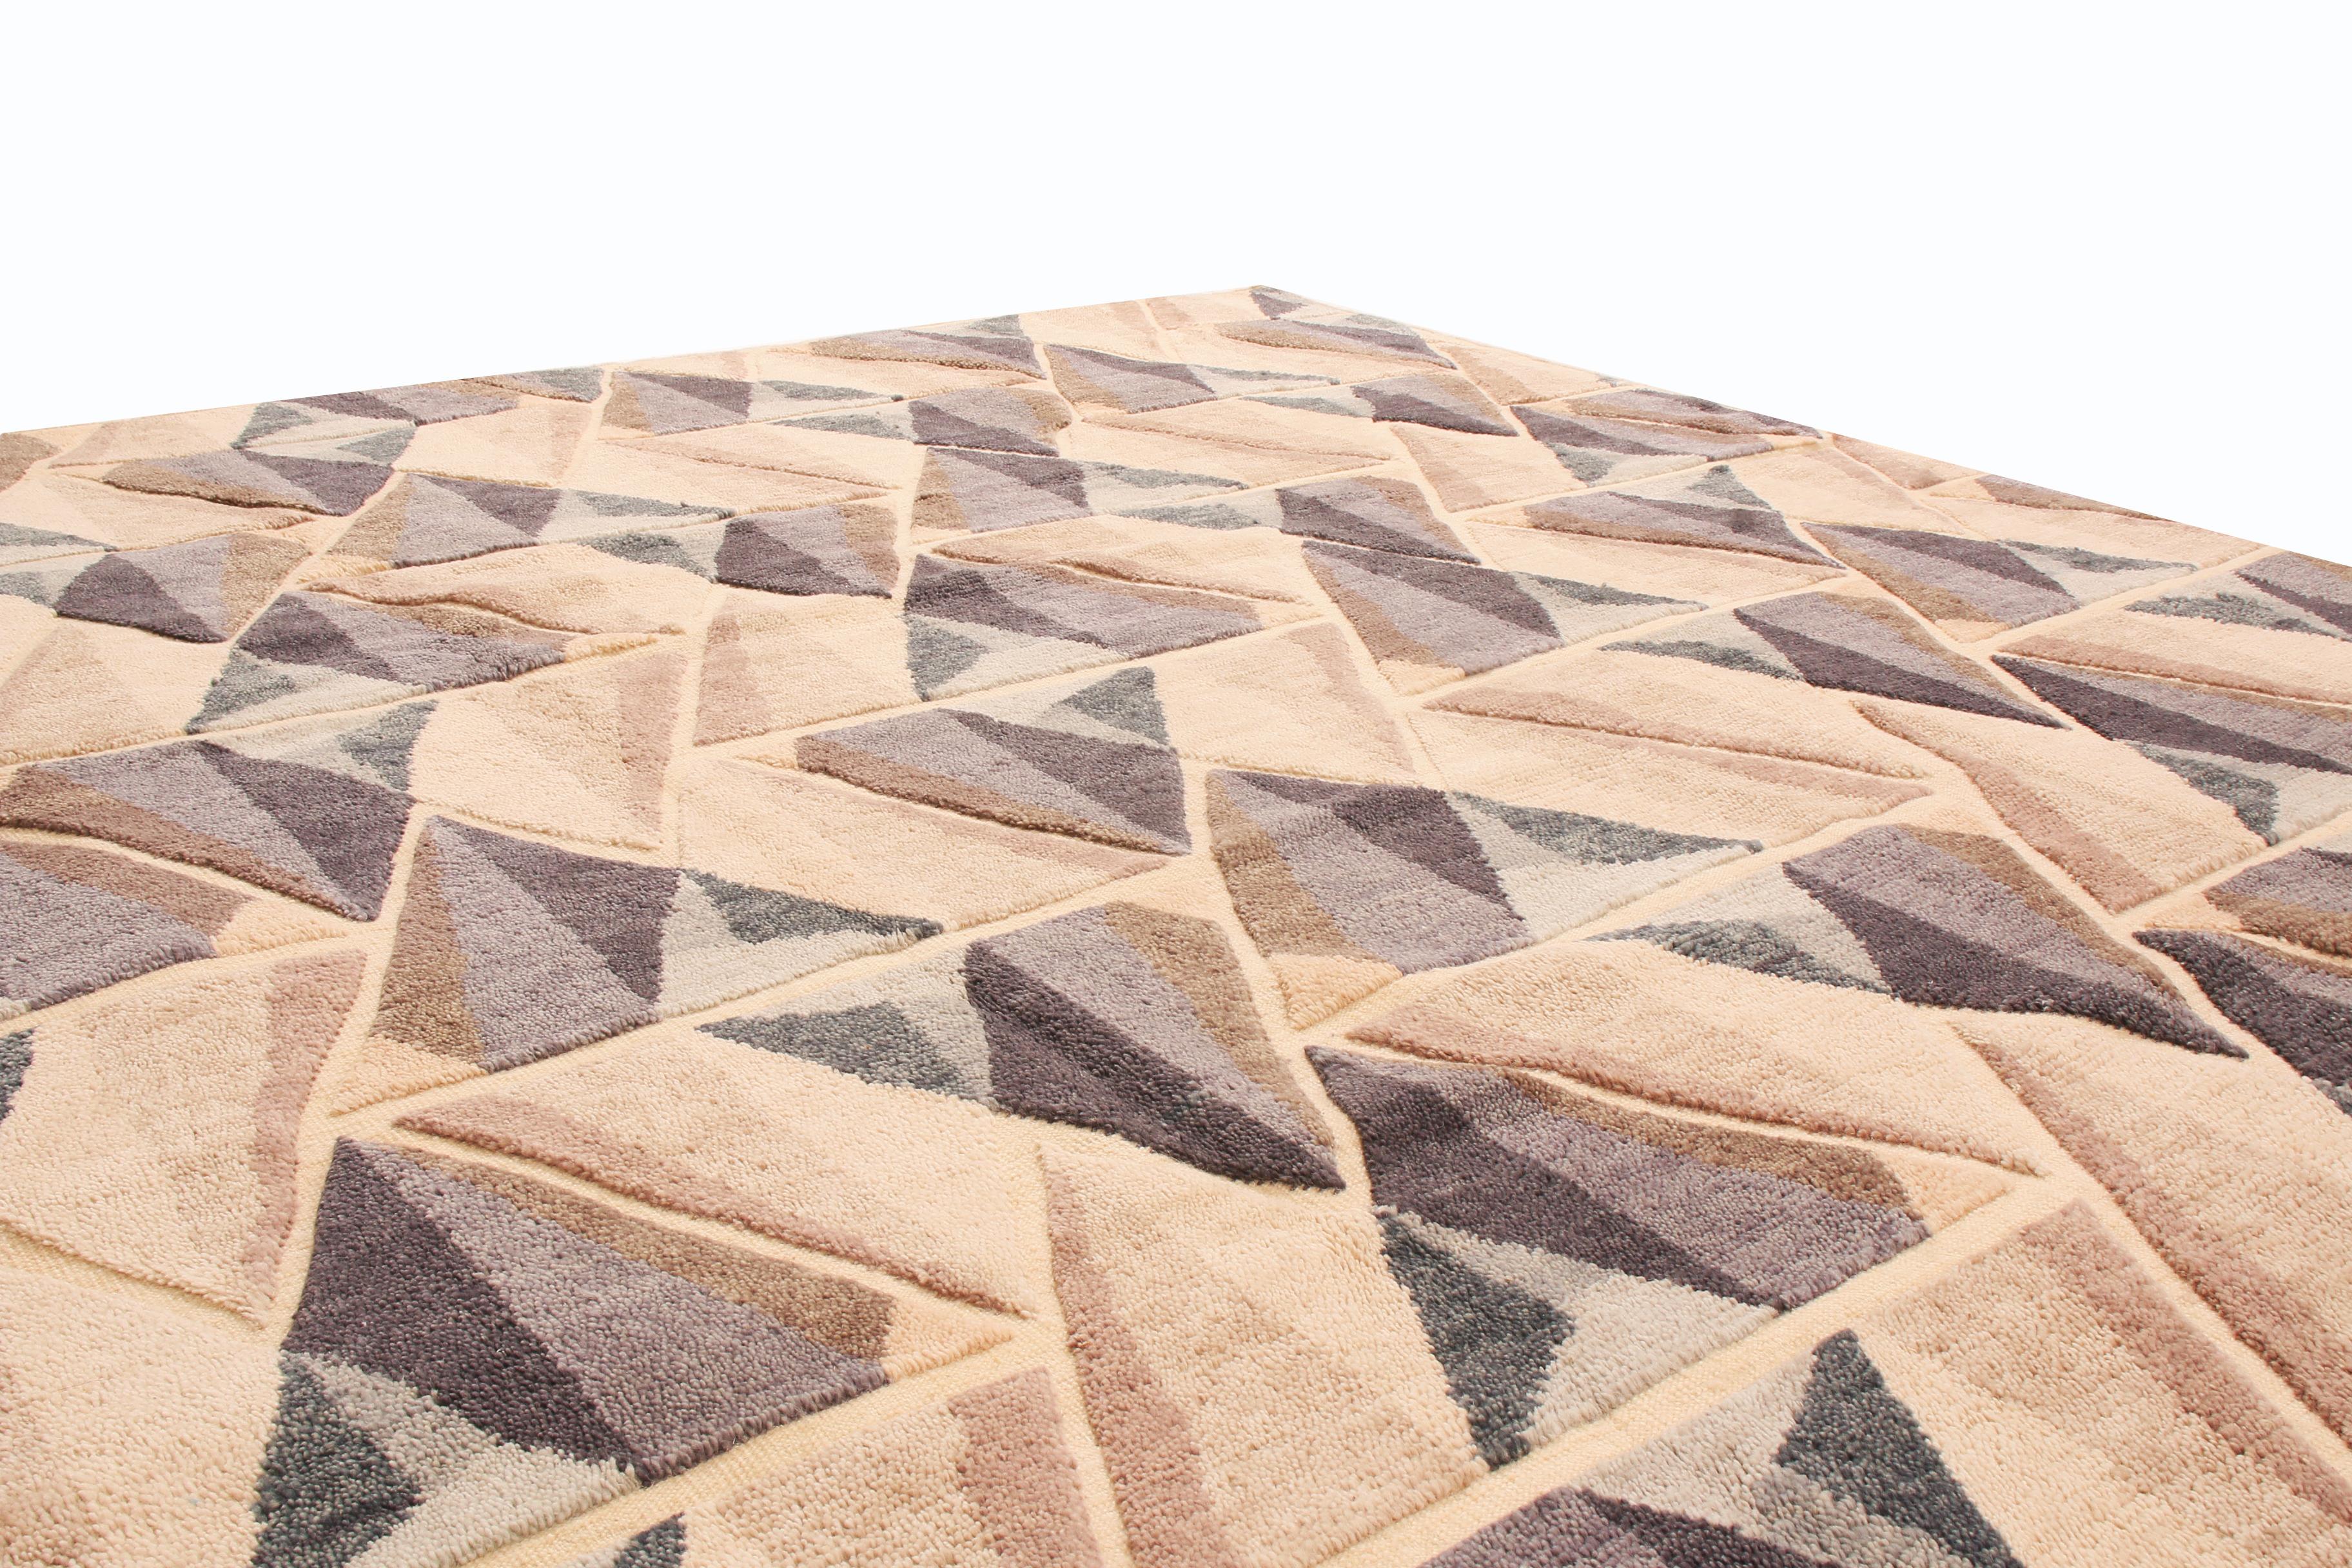 Originating from India, this geometric rug is hand-knotted in high-quality wool with an all-over field design blending influences from prismatic patterns and Mid-Century Modern color sensibilities. Depicted in an all-over, borderless field design,